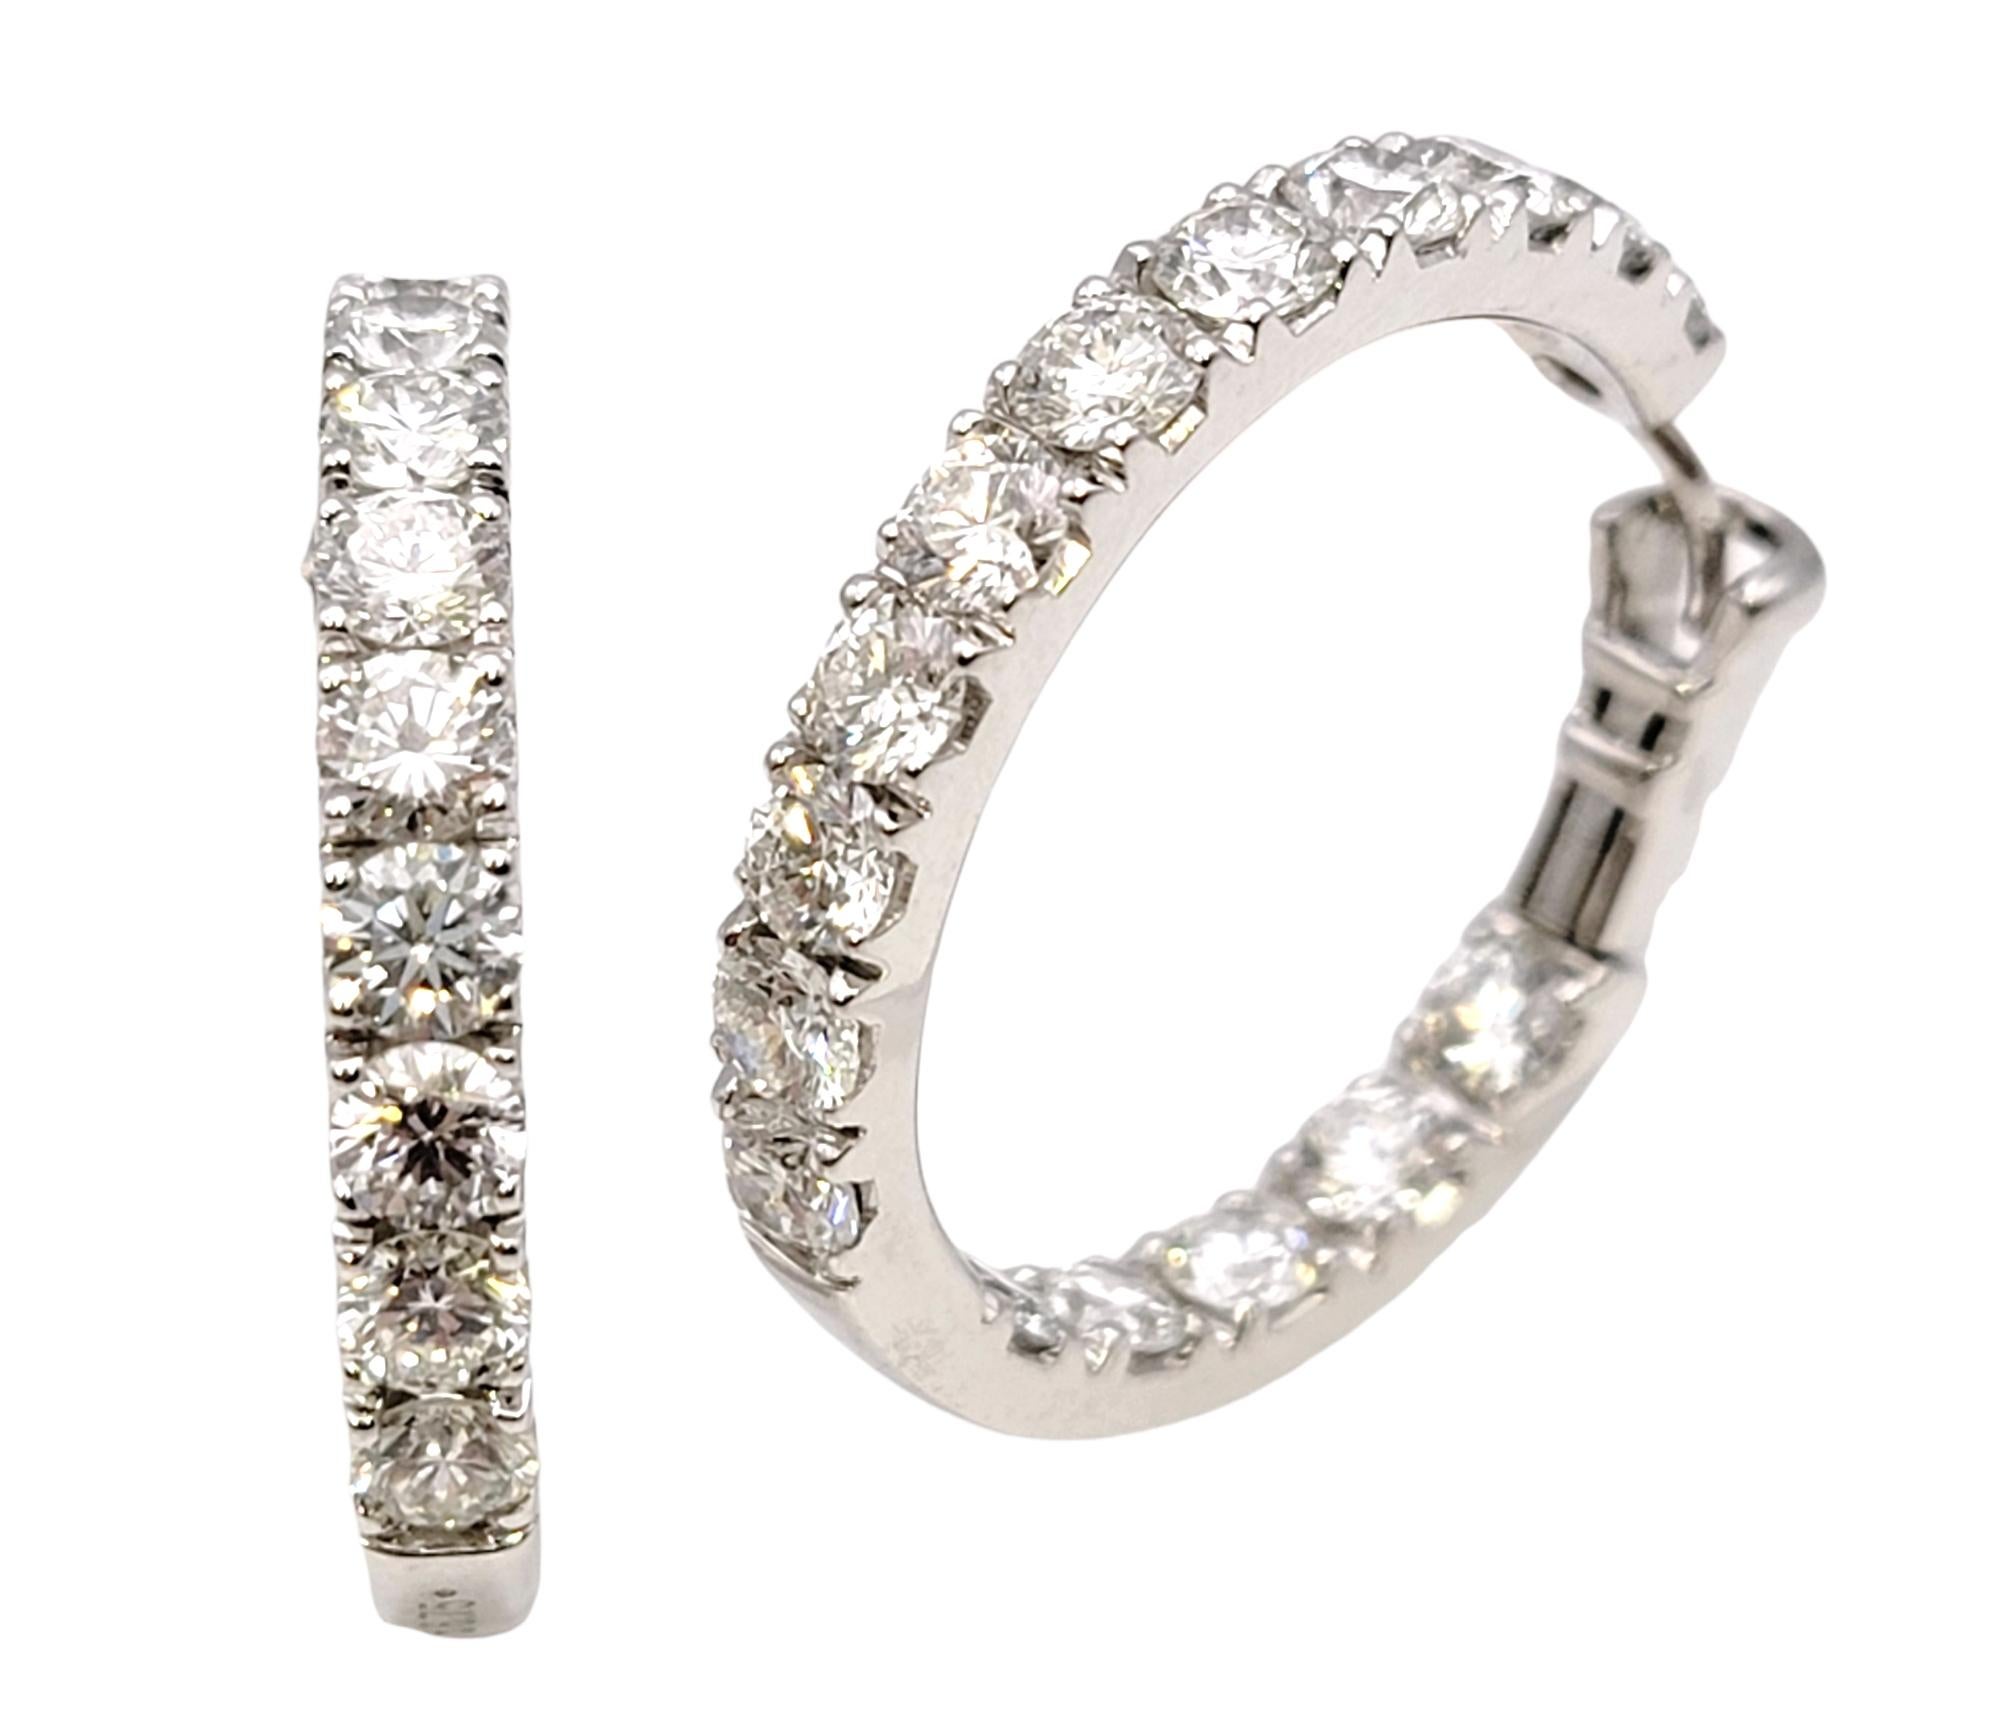 6.75 Carat Round Brilliant Diamond Inside-Out Hinged Hoop Earrings 18 Karat Gold In Excellent Condition For Sale In Scottsdale, AZ